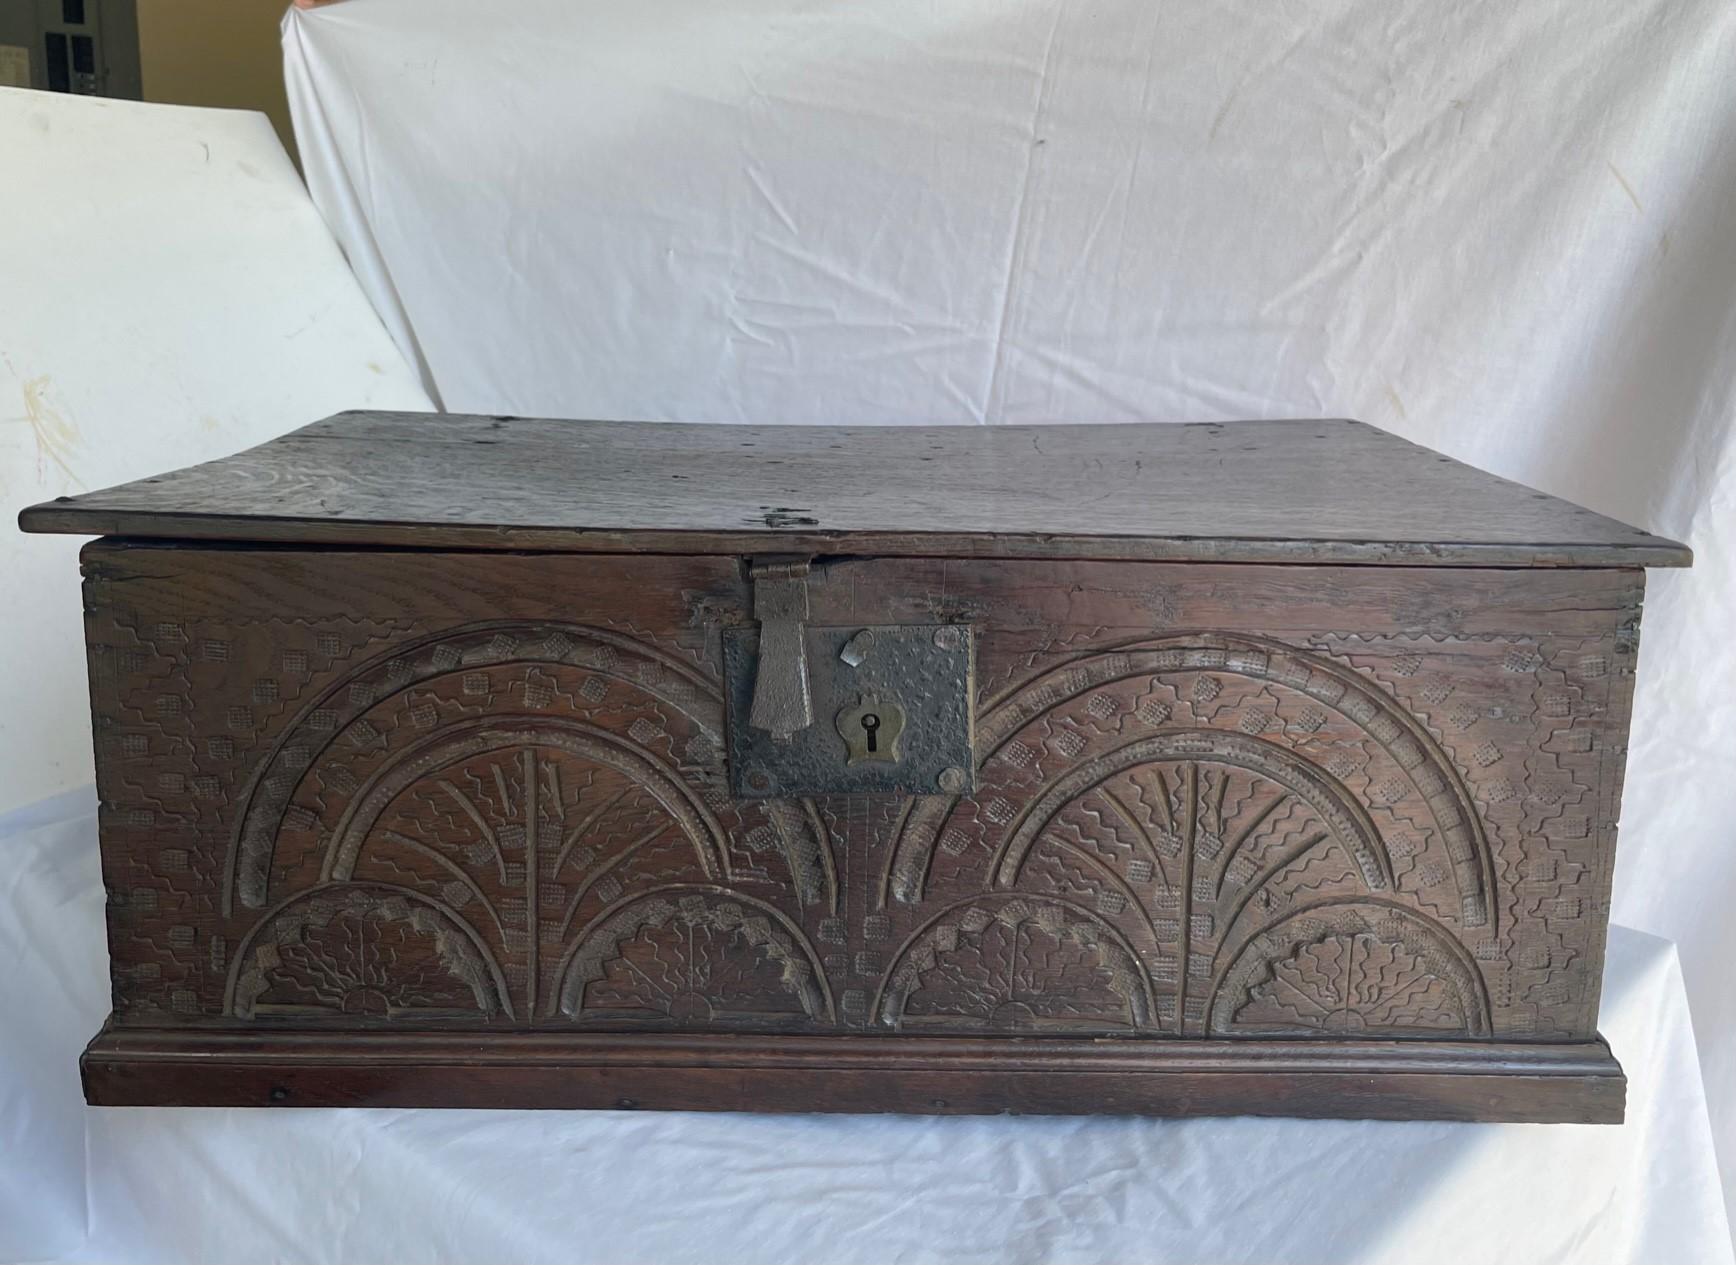 17th Century English Jacobean Carved Oak Bible Box.

Period Jacobean solid dark oak bible box from the 17th century. The front is beautifully carved with a lunette design. Wrought iron rattail hinges, latch and lock plate are original. Lock is